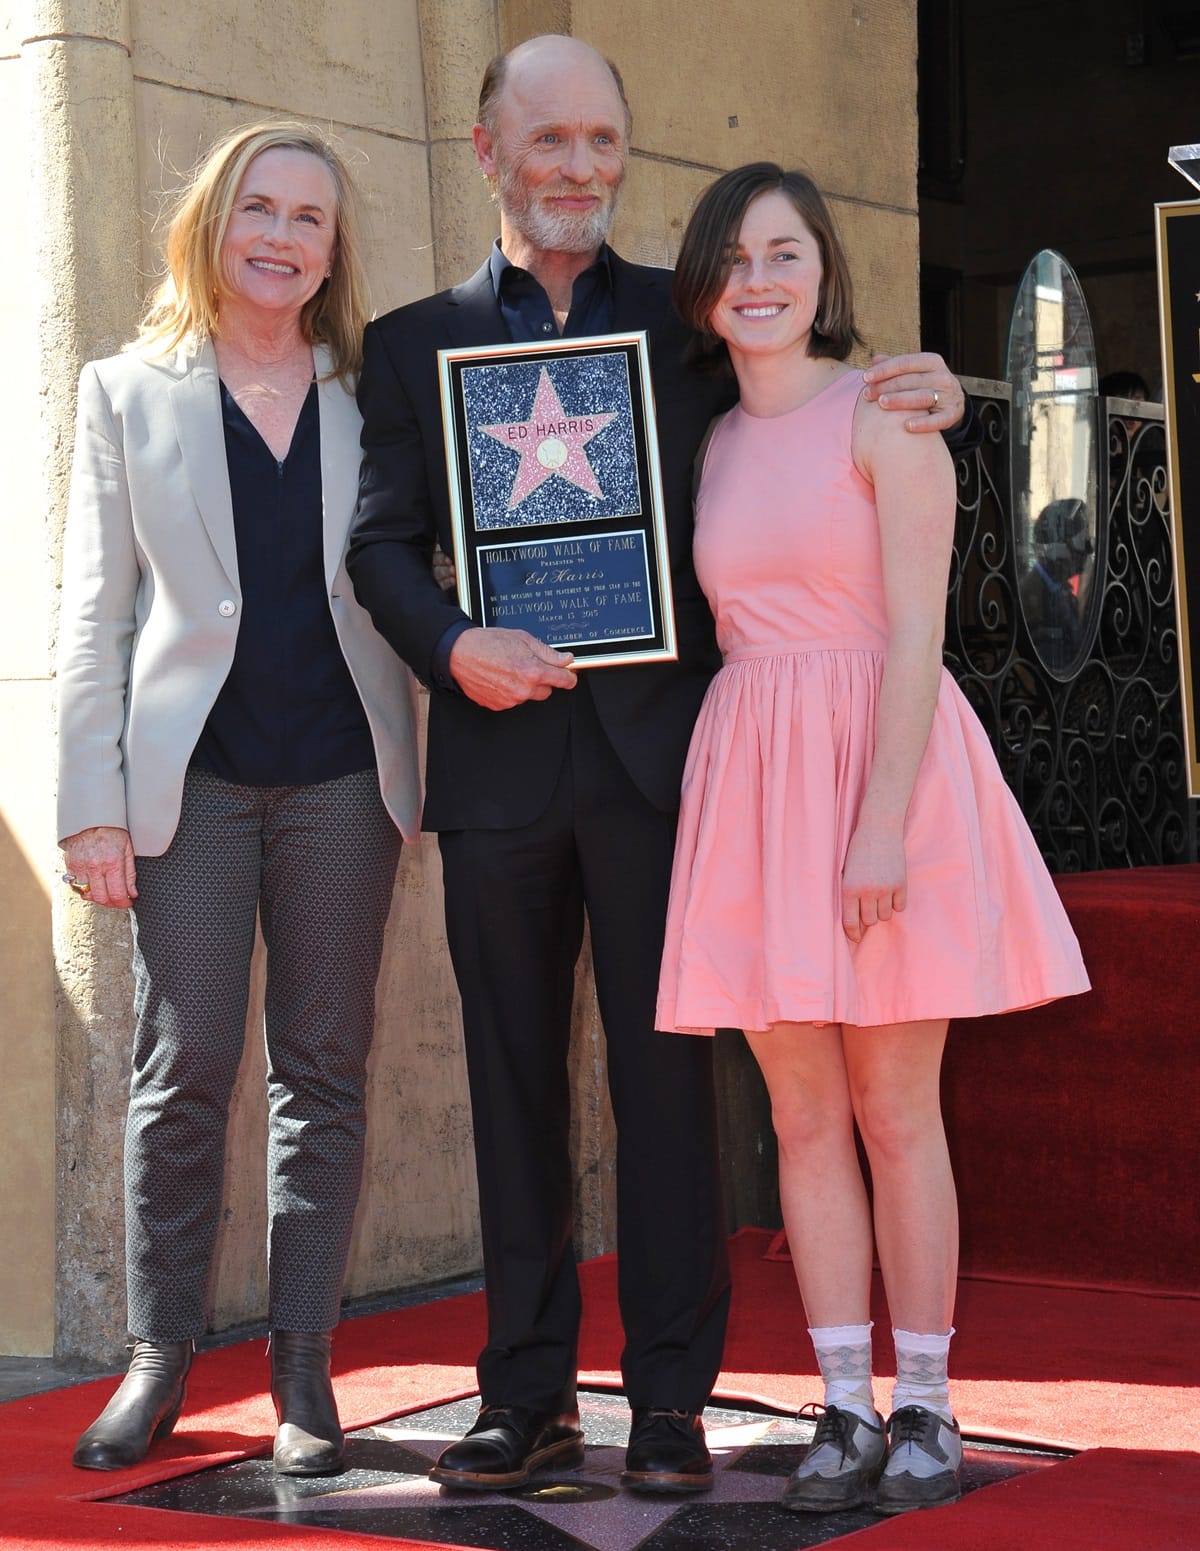 Actress Amy Madigan, who played Chanice Kobolowski, the girlfriend of Uncle Buck and proprietor of a tire shop, with her husband Ed Harris and her daughter Lily at the Ed Harris Star ceremony